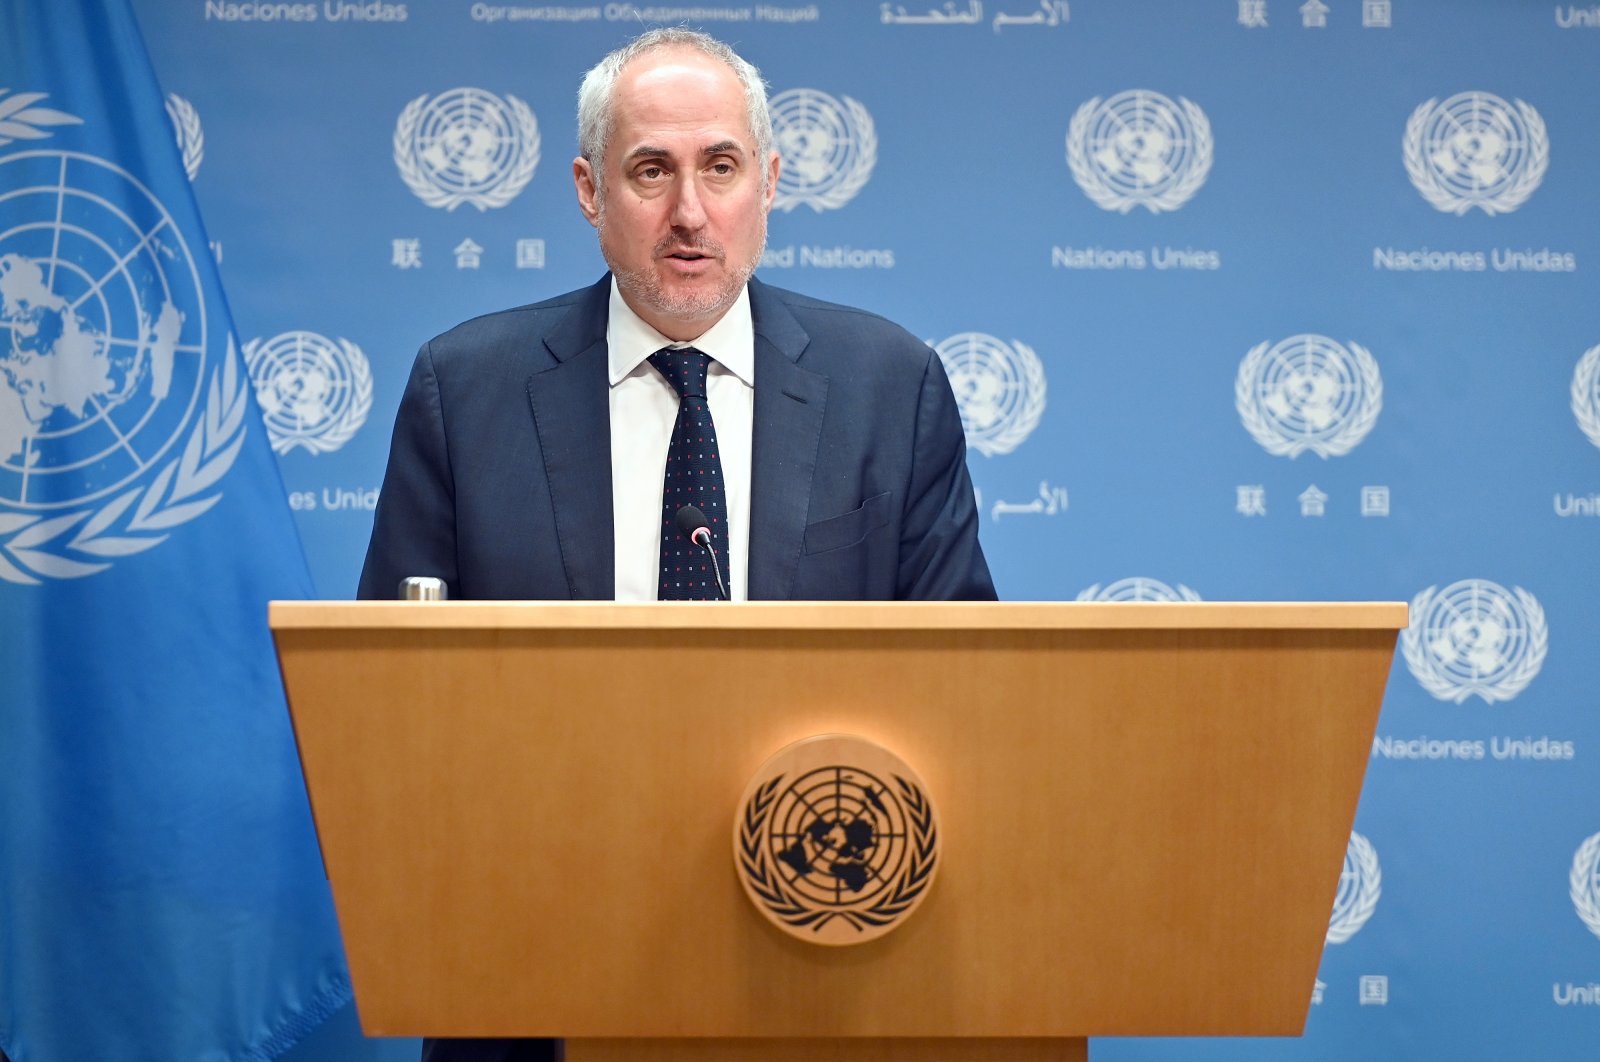 U.N. Secretary-General spokesperson Stephane Dujarric holds the Noon Briefing on the International Day of U.N. Peacekeepers, United Nations Headquarters, NY, U.S., May 26, 2022. (Reuters File Photo)